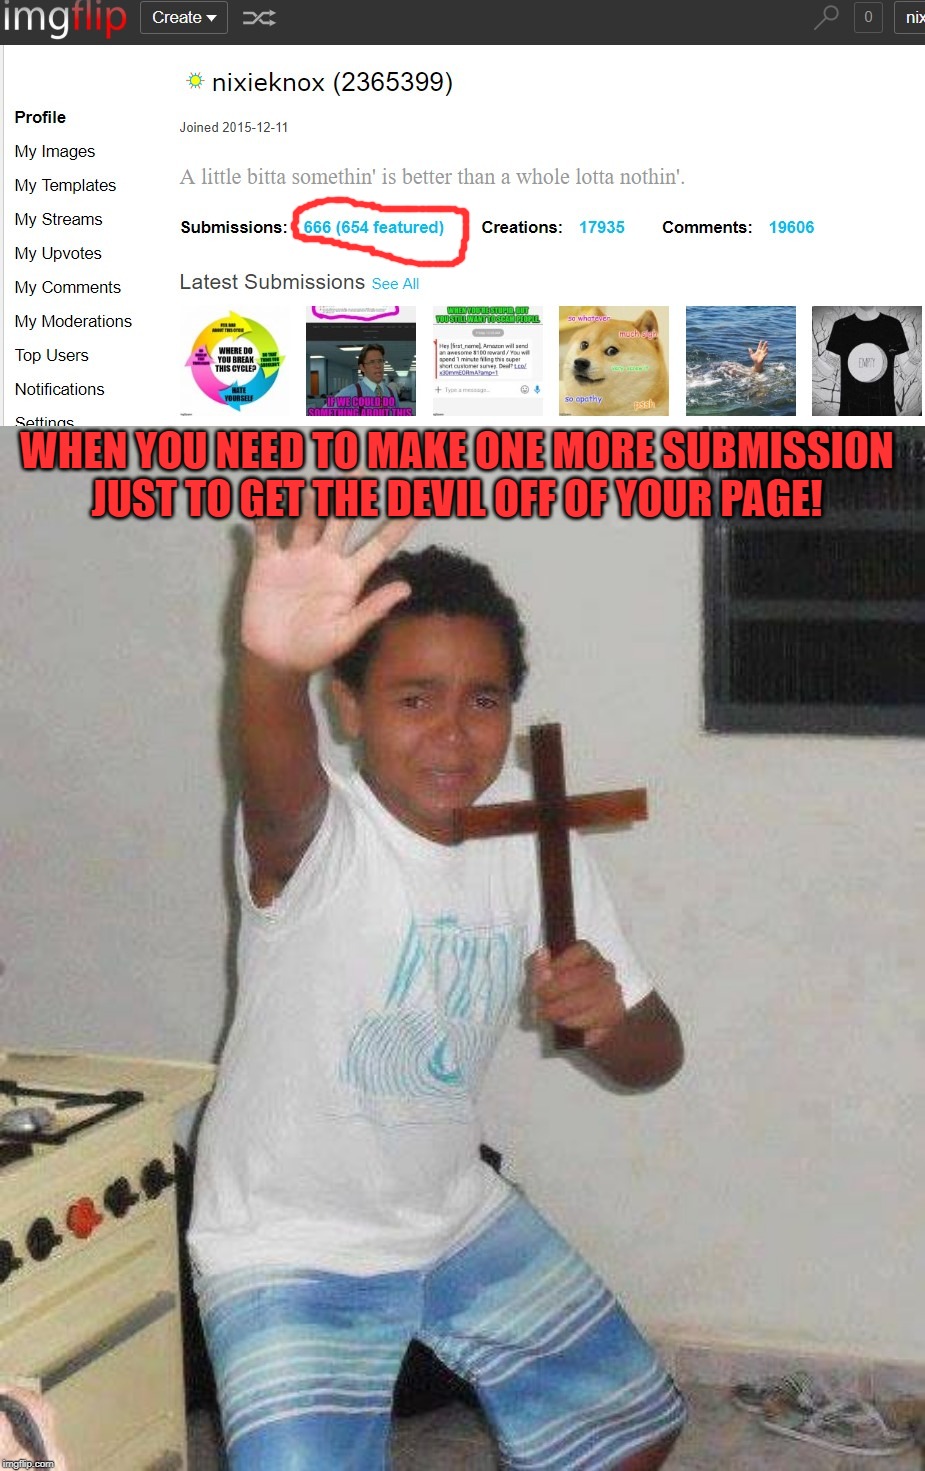 Thanks LordCheesus for pointing it out! LOL | WHEN YOU NEED TO MAKE ONE MORE SUBMISSION JUST TO GET THE DEVIL OFF OF YOUR PAGE! | image tagged in kid with cross,memes,nixieknox,tha debil | made w/ Imgflip meme maker